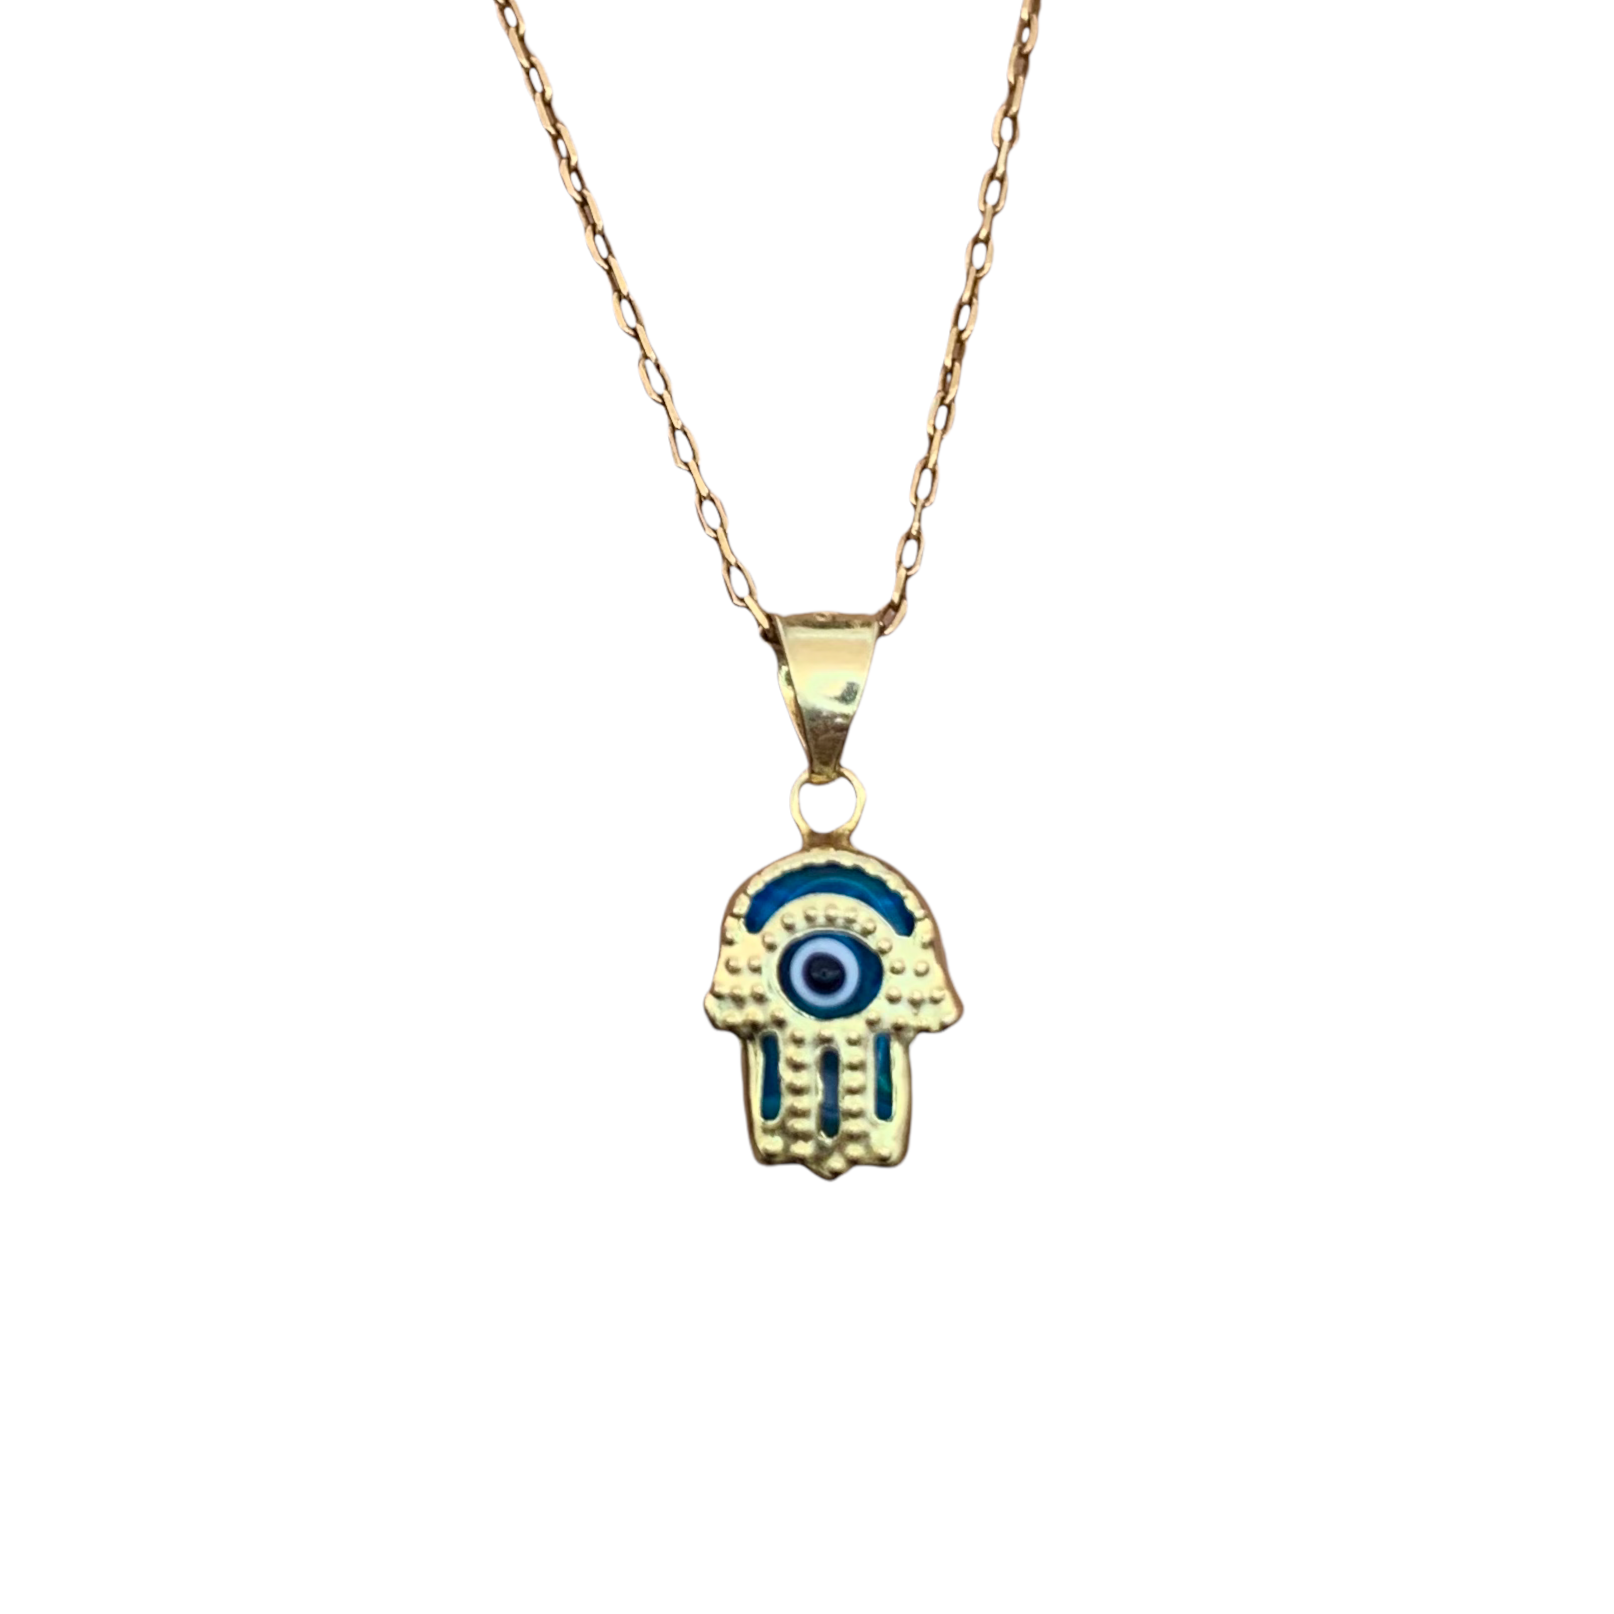 Hamsa with Turkish Blue Glass Evil Eye Sterling Silver Necklace